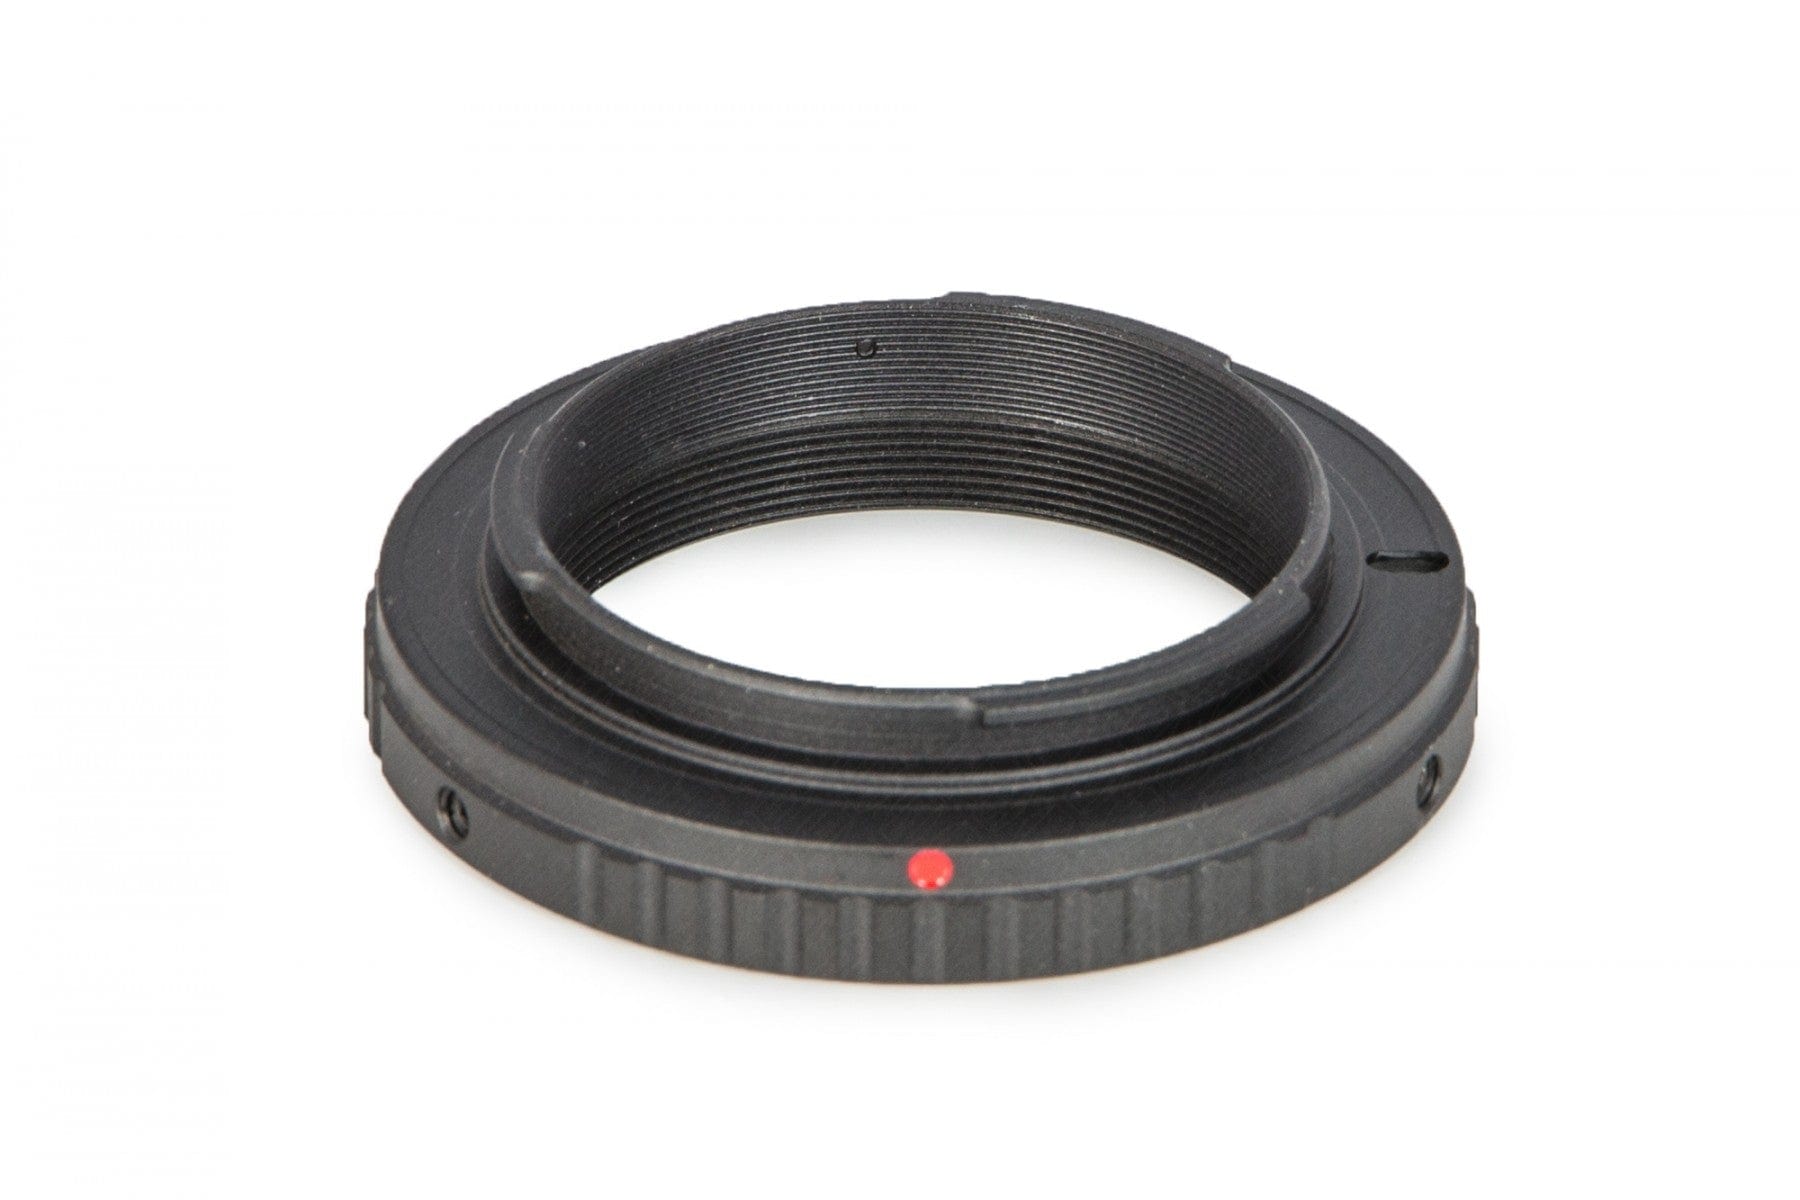 Baader Planetarium Accessory Baader Wide T-Ring Nikon with D52i to T-2 and S52 - 2408333